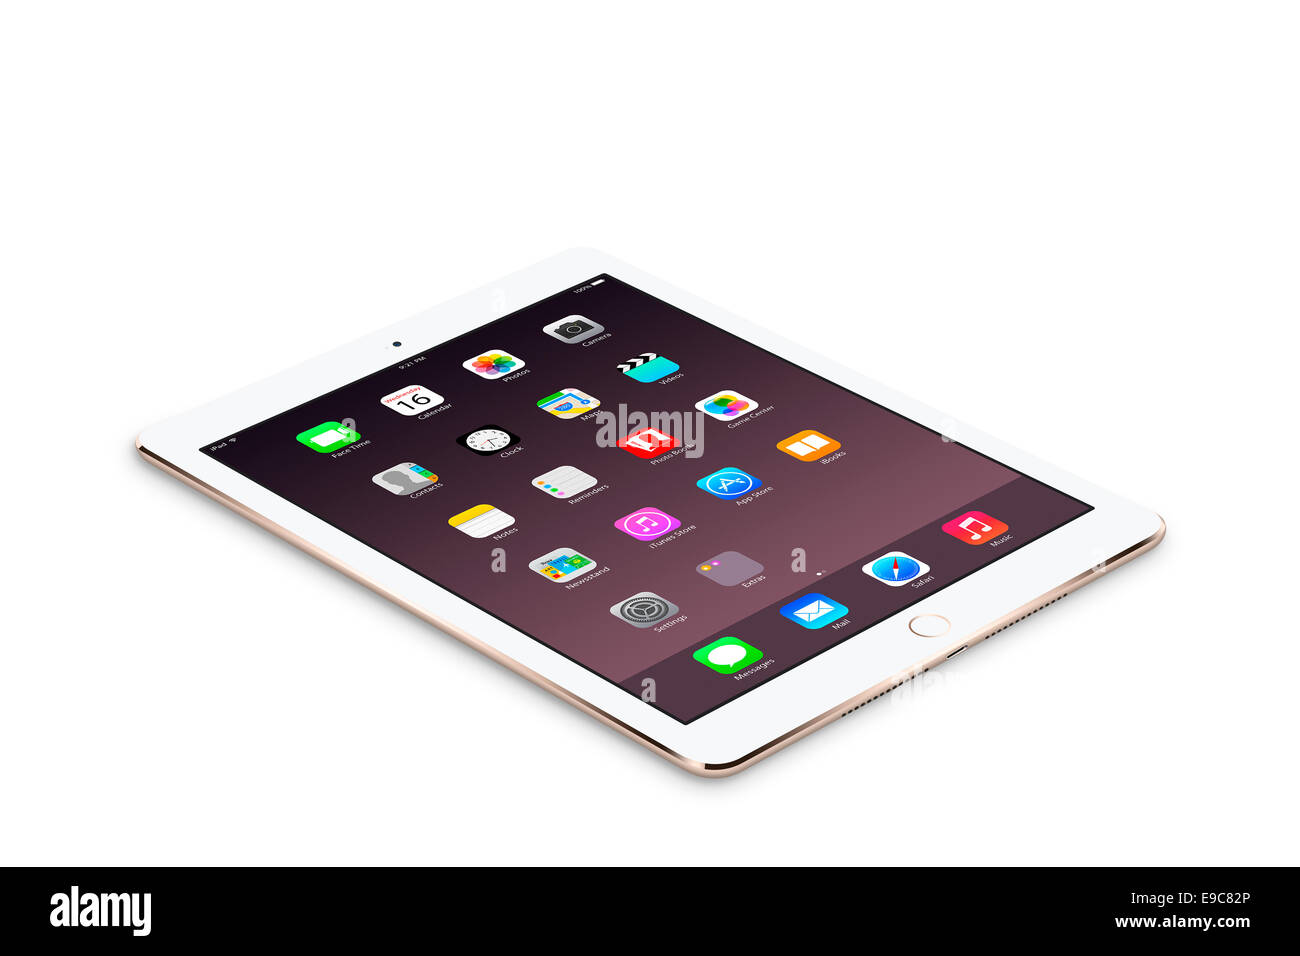 Tablet ipad air 2 gold with apps, digitally generated artwork. Stock Photo